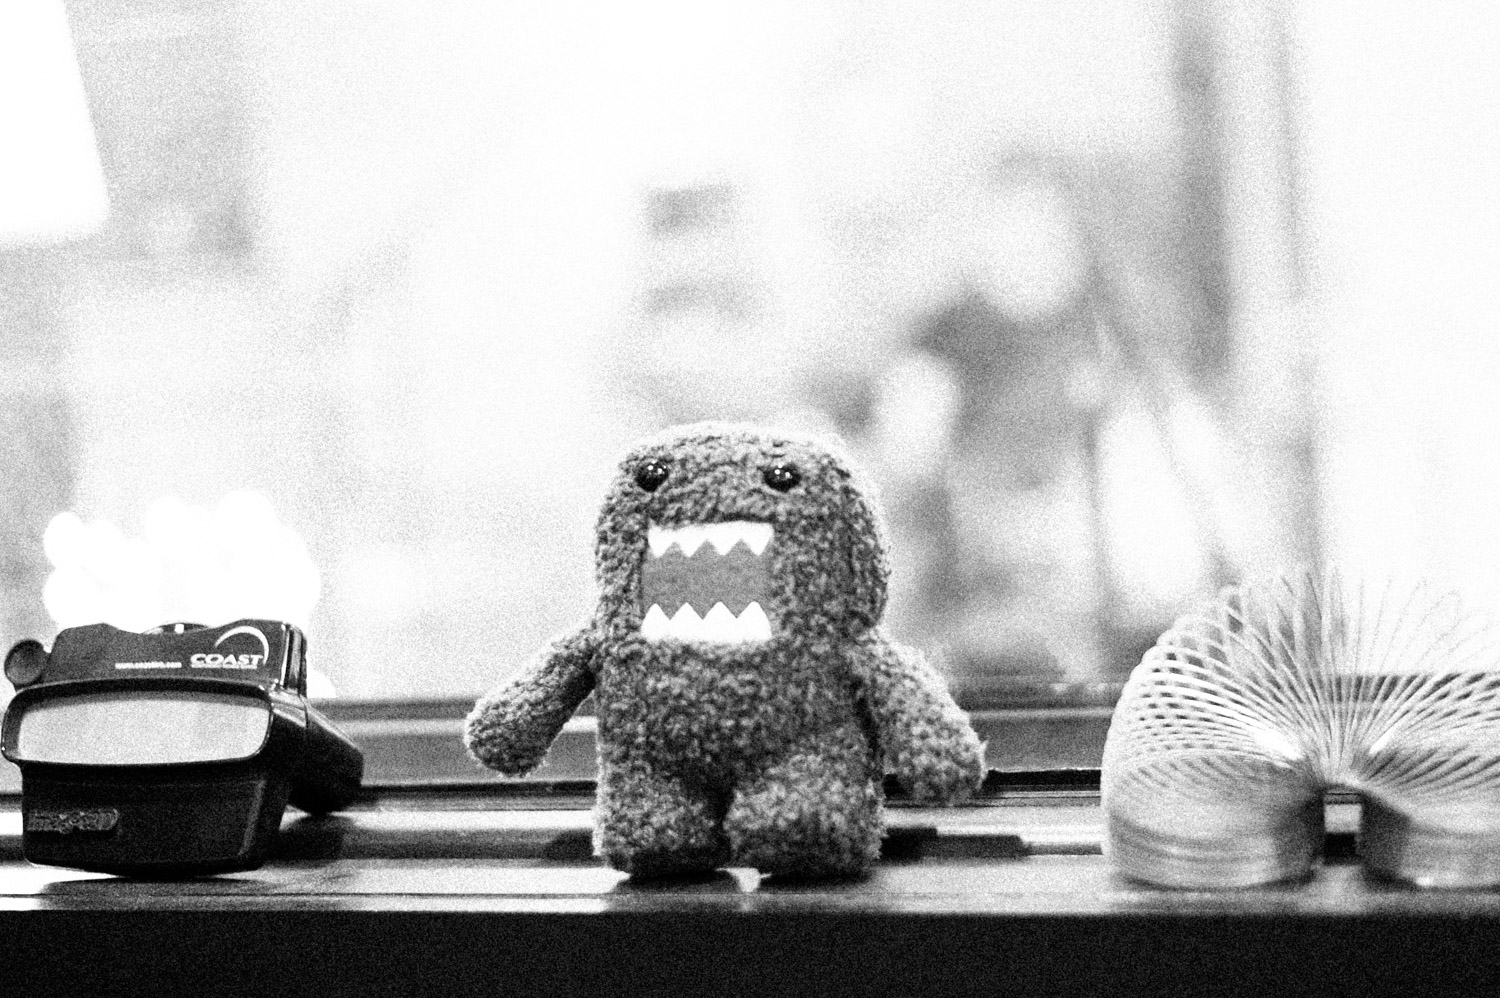 Domo sees everything. Everything.